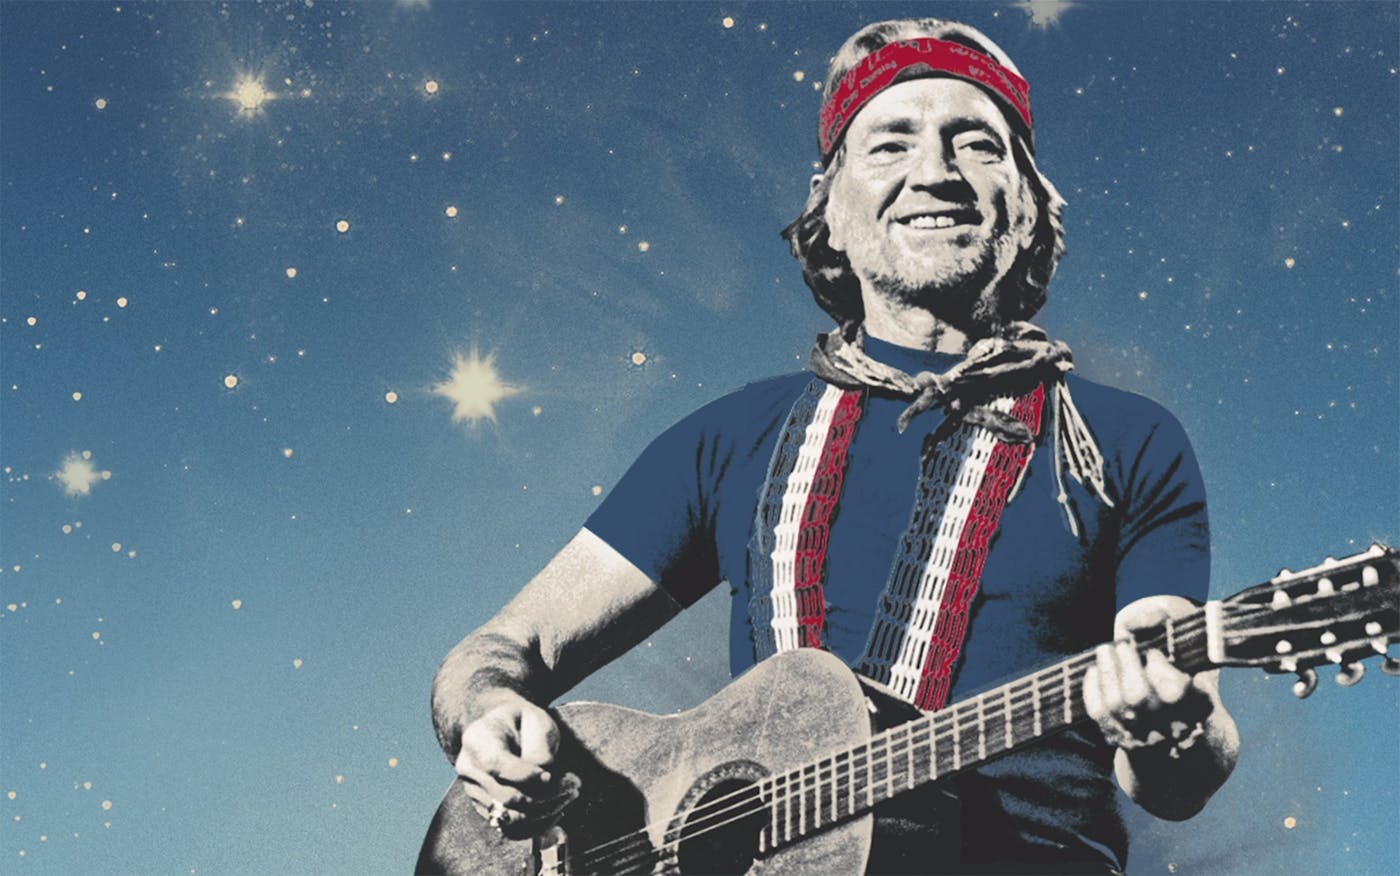 https://img.texasmonthly.com/2020/04/willie-nelson-albums-ranked-feature.jpg?auto=compress&crop=faces&fit=crop&fm=jpg&h=1050&ixlib=php-3.3.1&q=45&w=1400